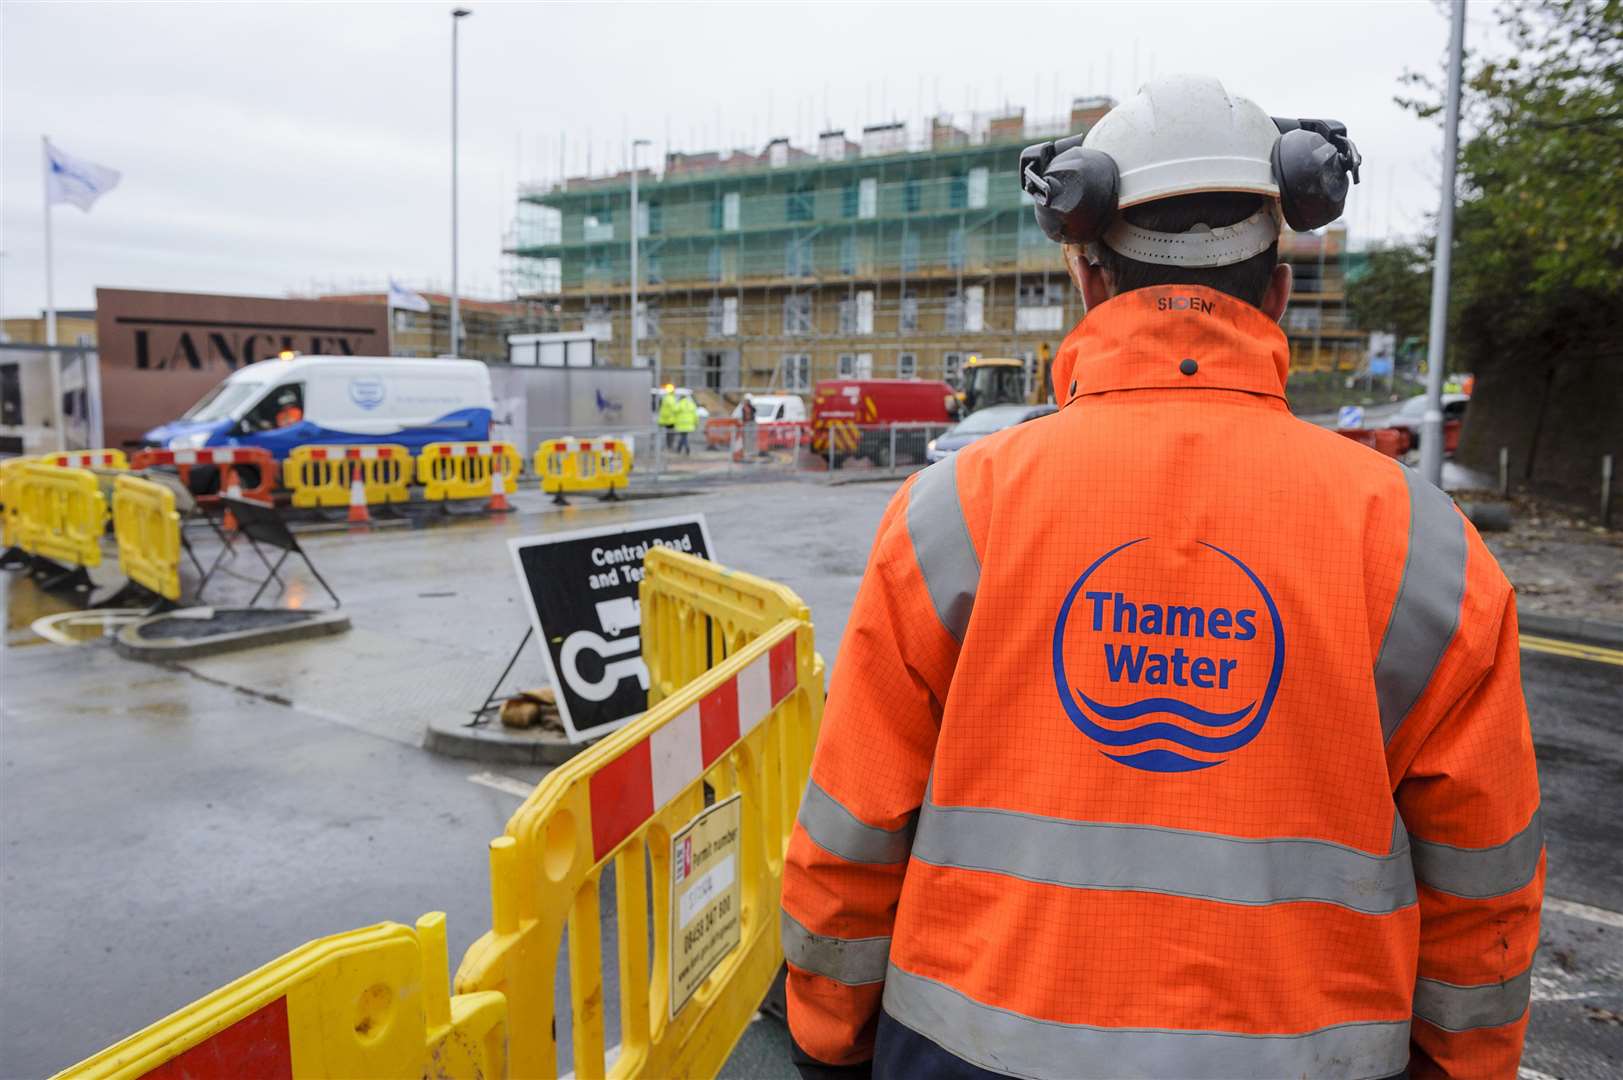 Thames Water has been forced to pay back millions in penalties